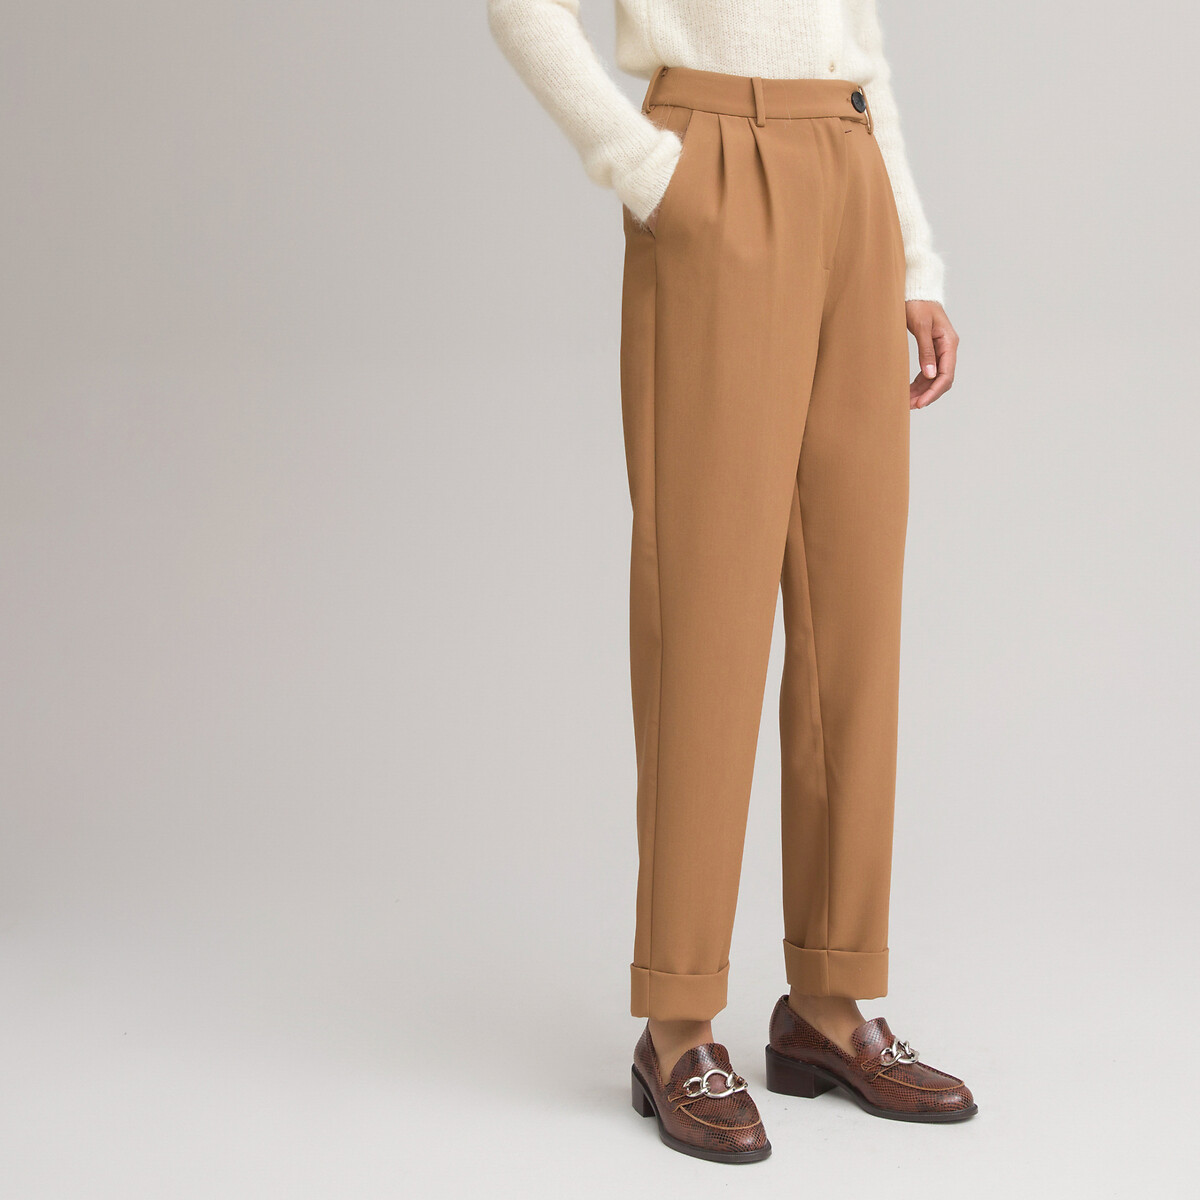 Tapered trousers  Buy cheap Tapered trousers for just 5 on  Everything5poundscom